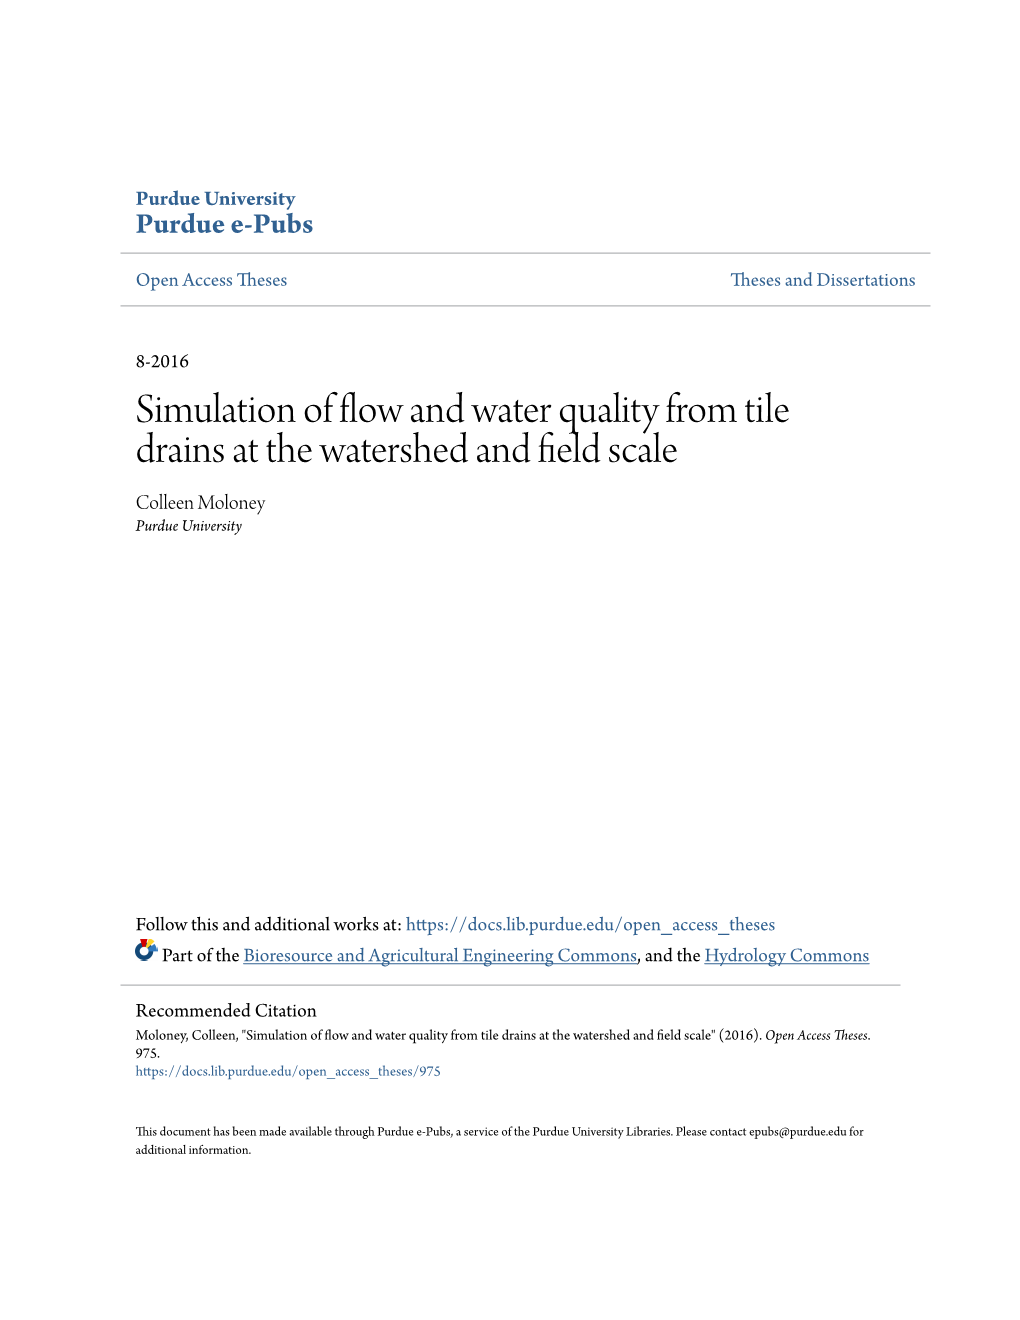 Simulation of Flow and Water Quality from Tile Drains at the Watershed and Field Scale Colleen Moloney Purdue University